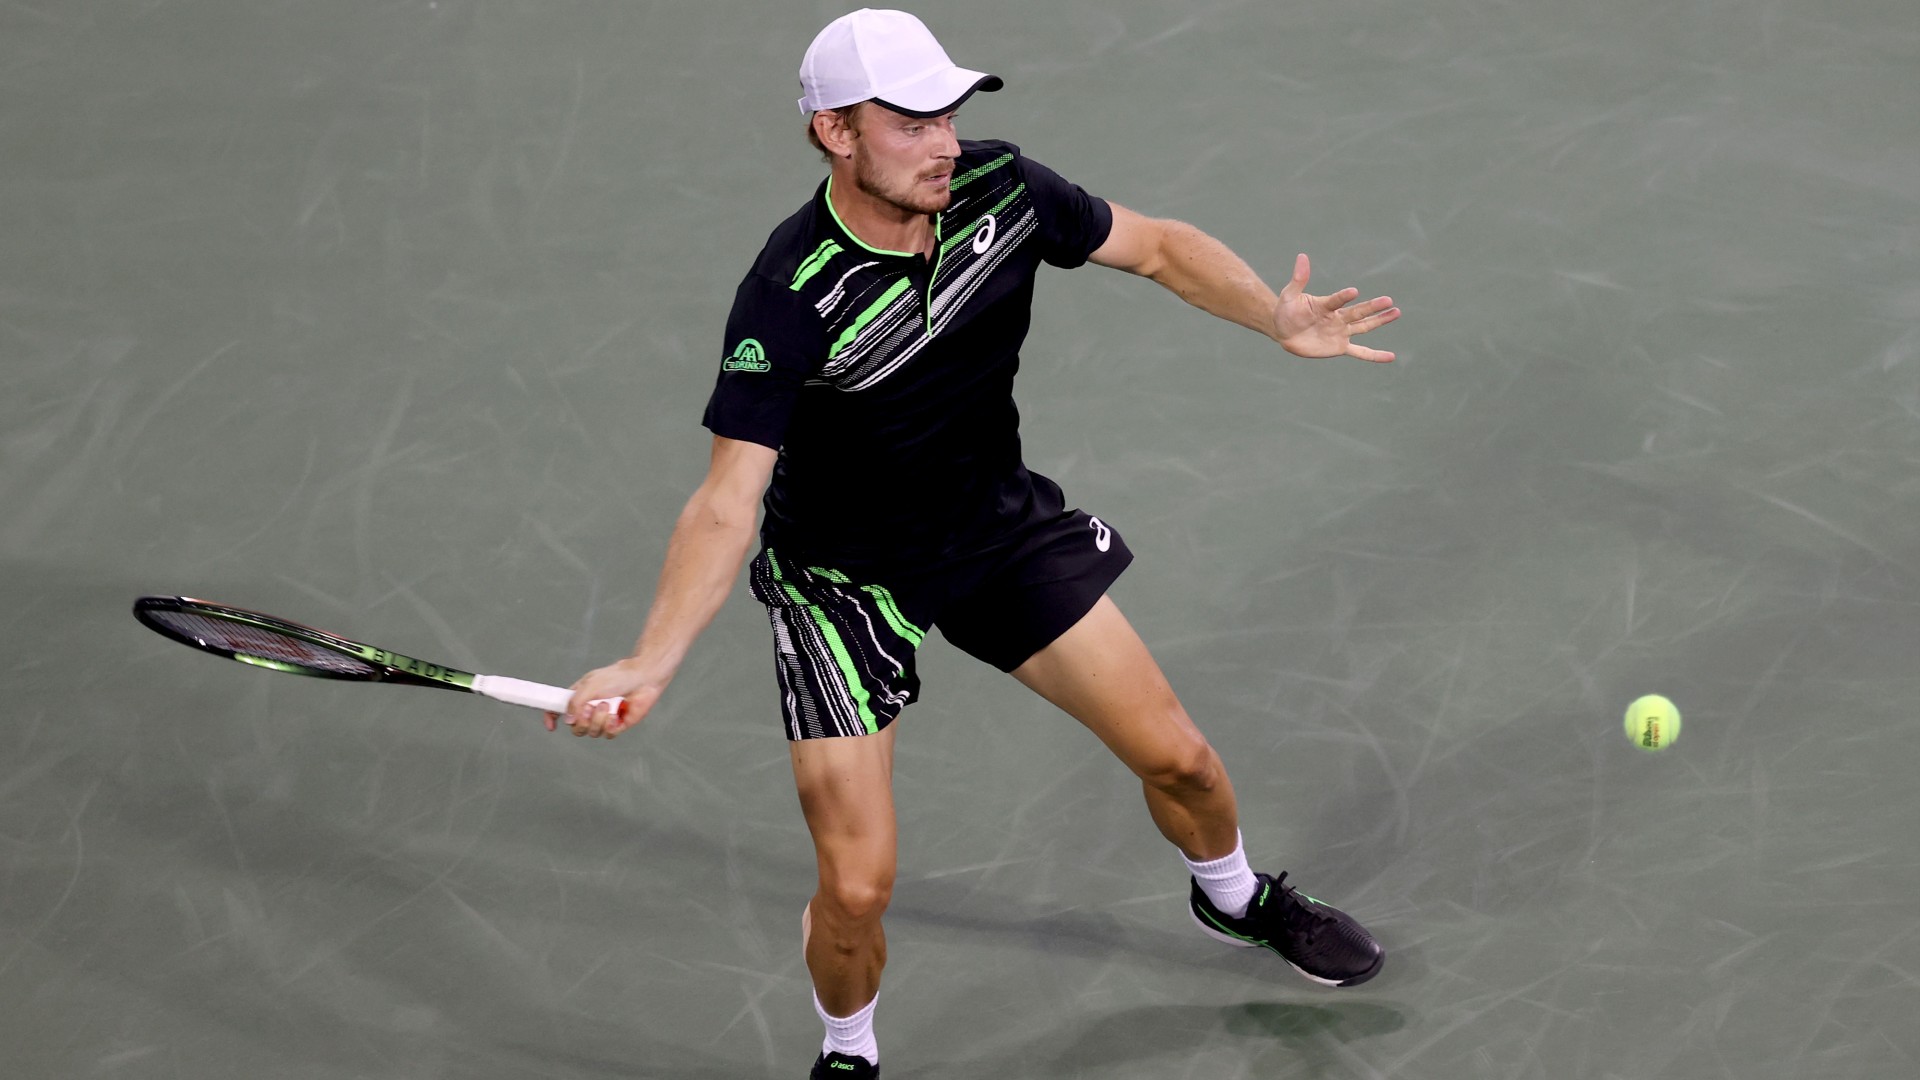 Playing for the first time since June, former world number seven David Goffin succumbed to Guido Pella 6-3 6-3 on Sunday.